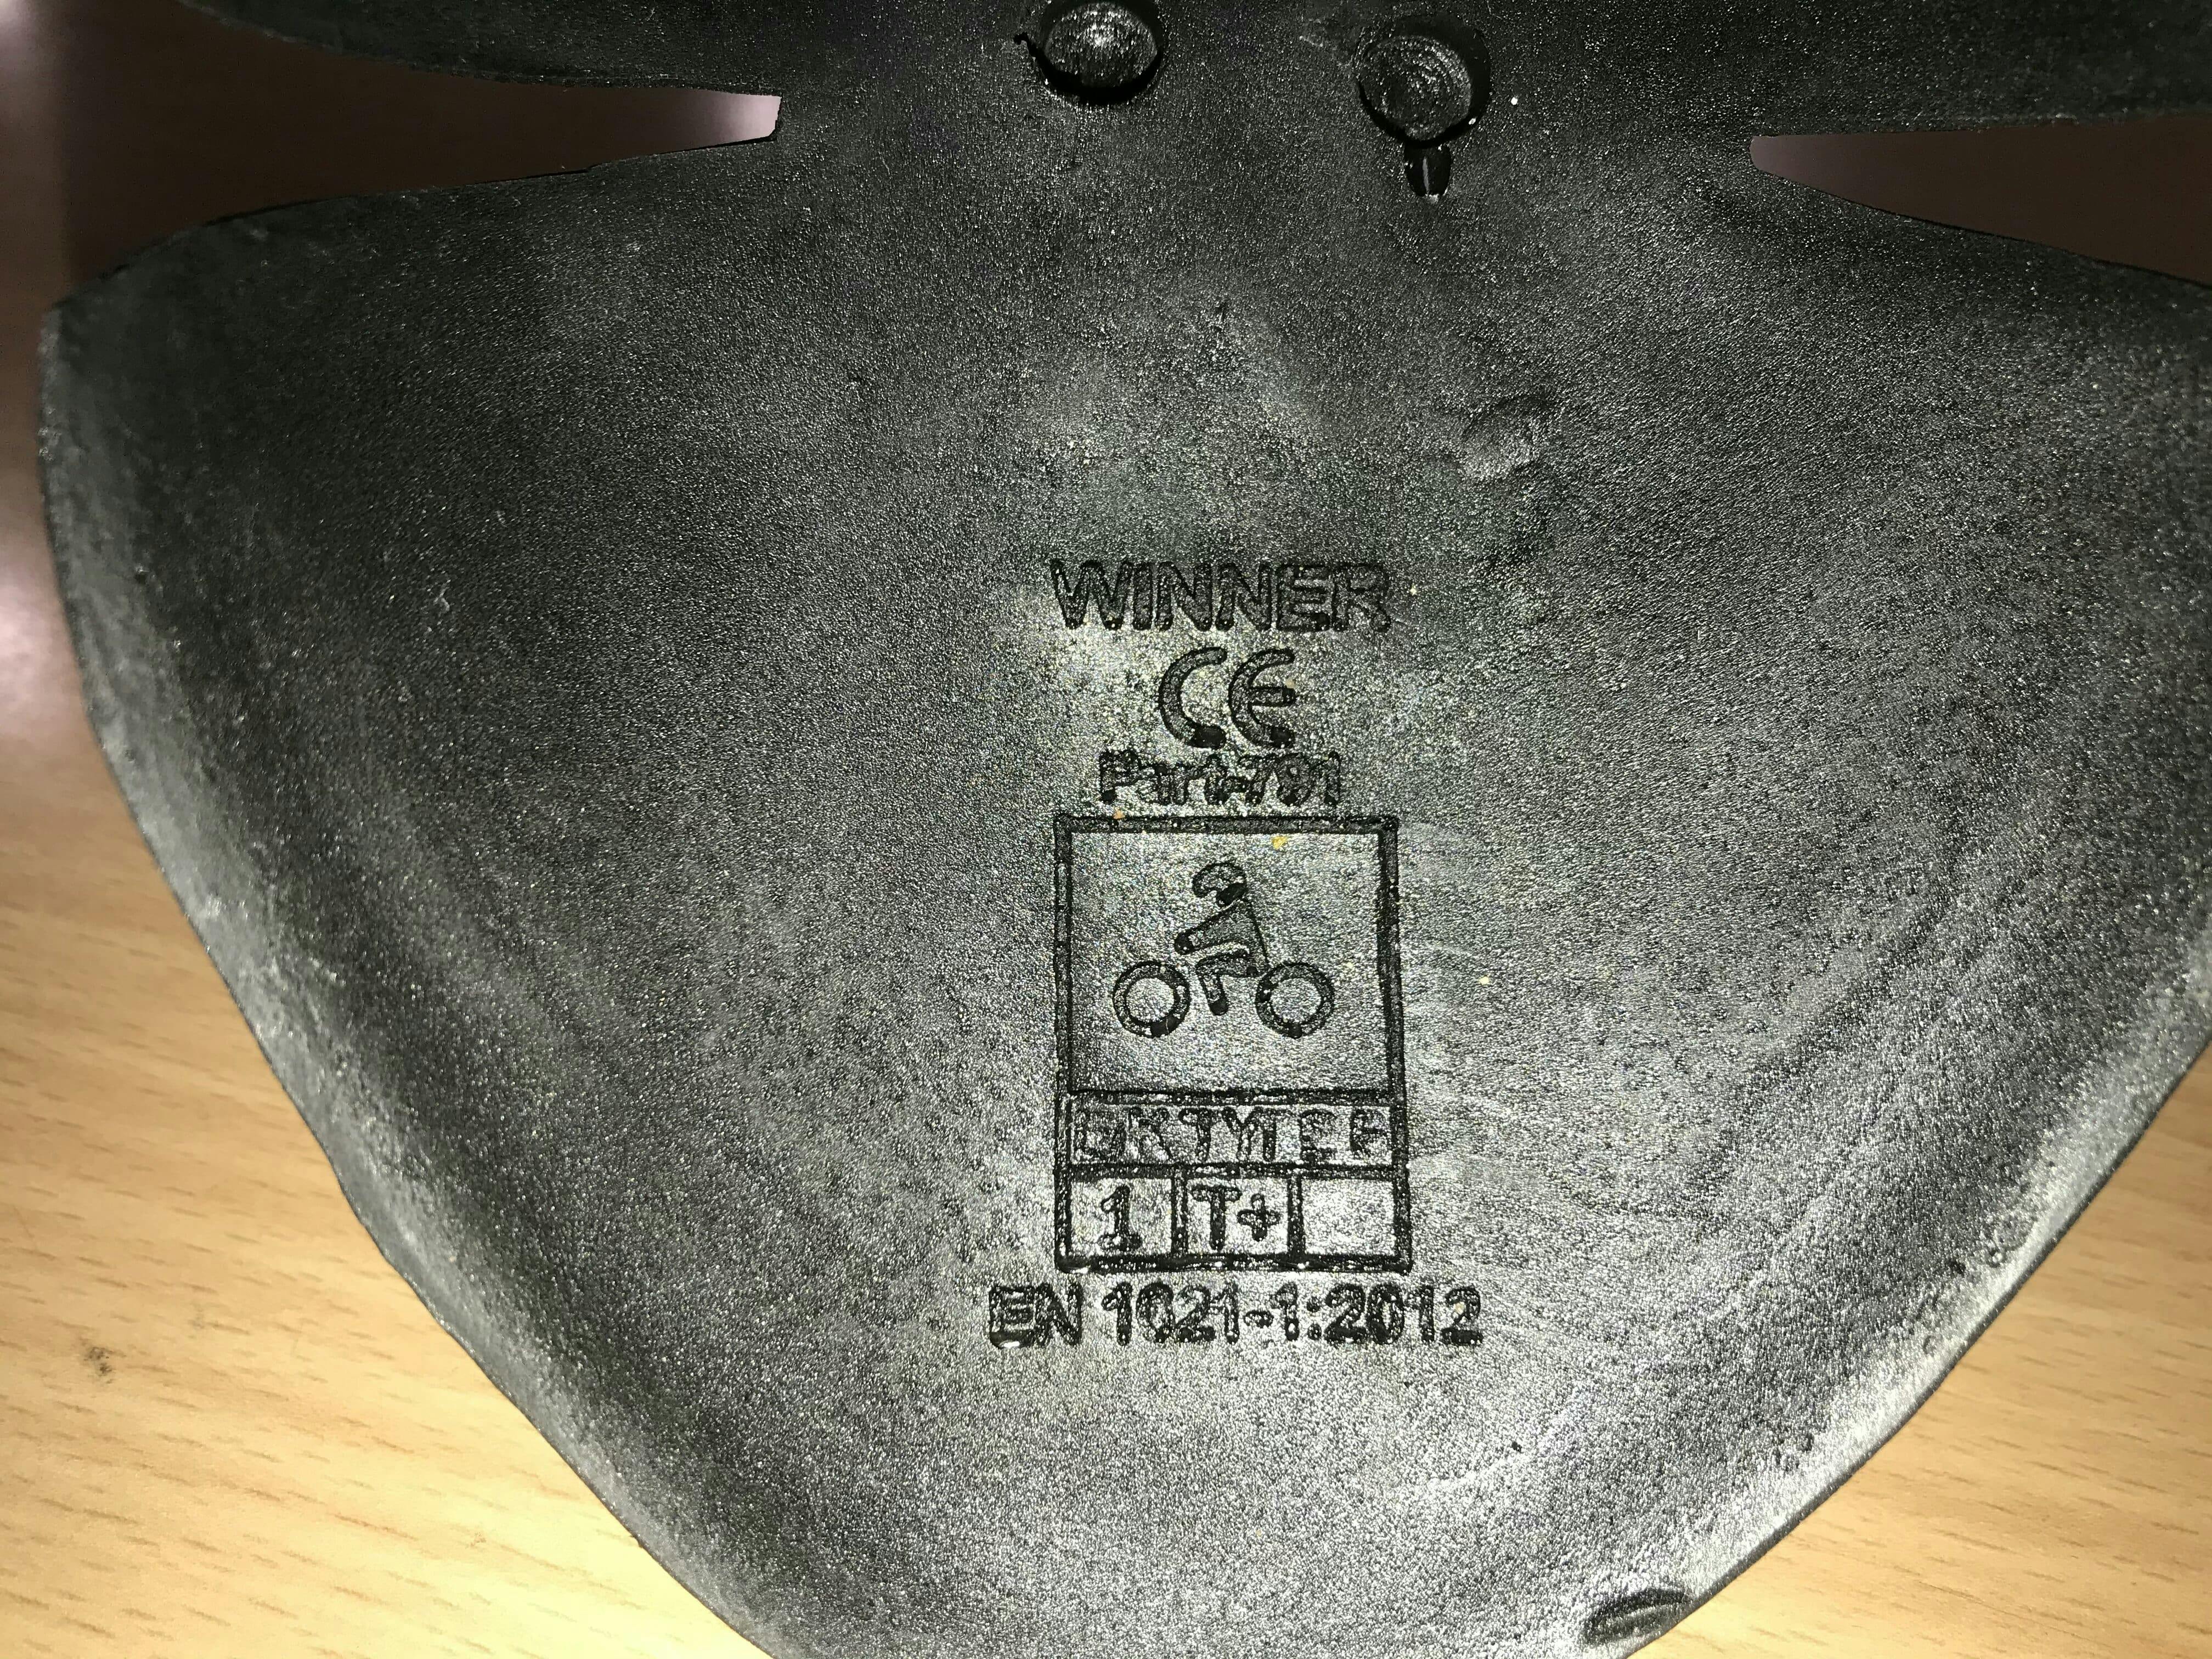 CE markings on knee armour from a pair of Merlin jeans